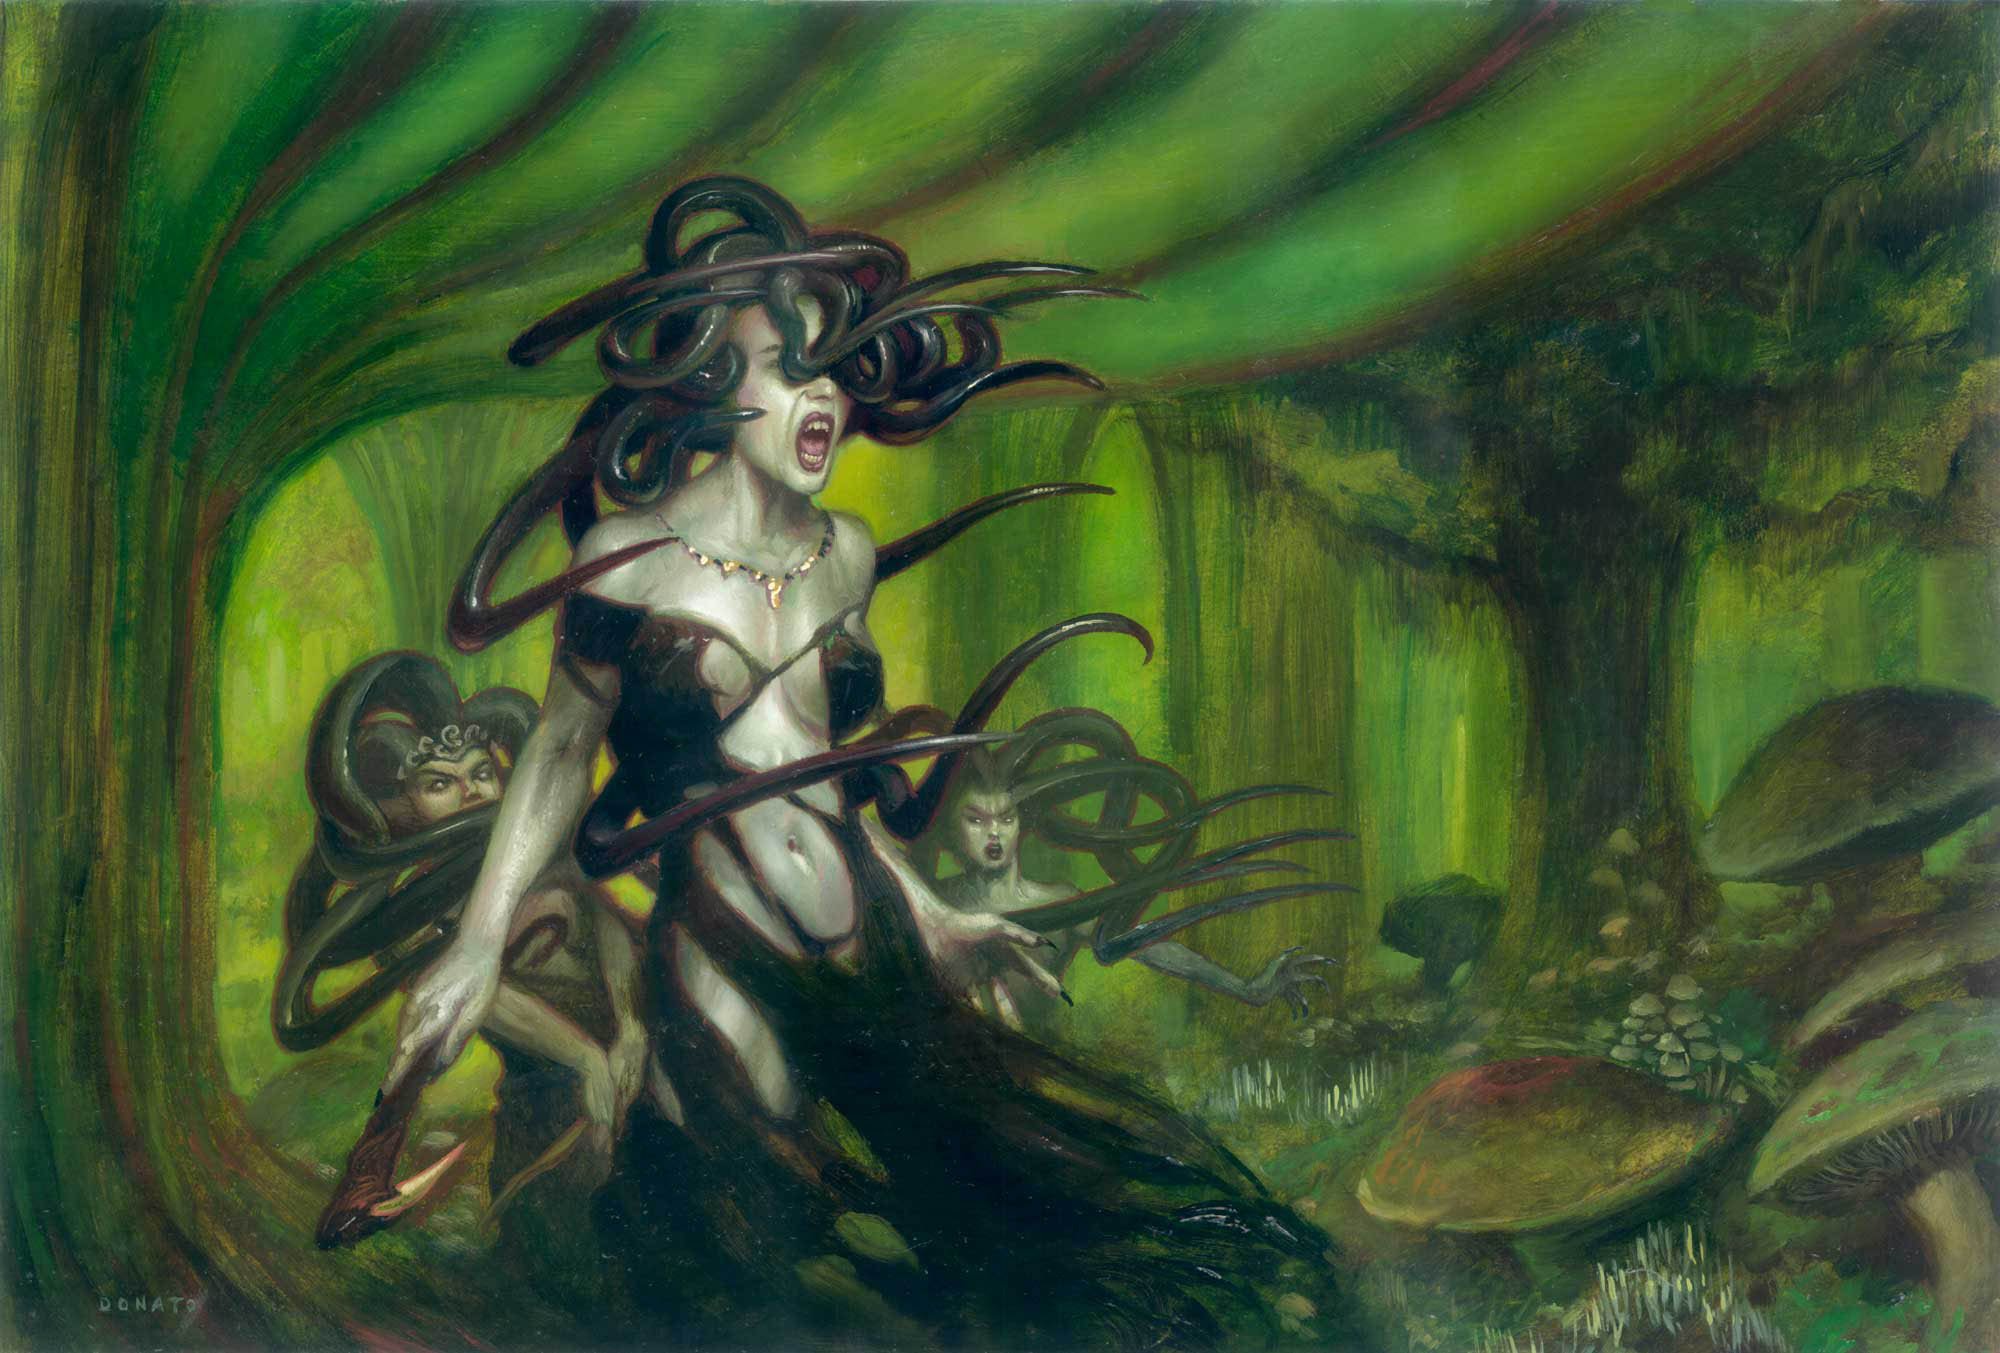 Sisters of the Stone Death
Ravnica
15" x 20"  Oil on Panel
private collection